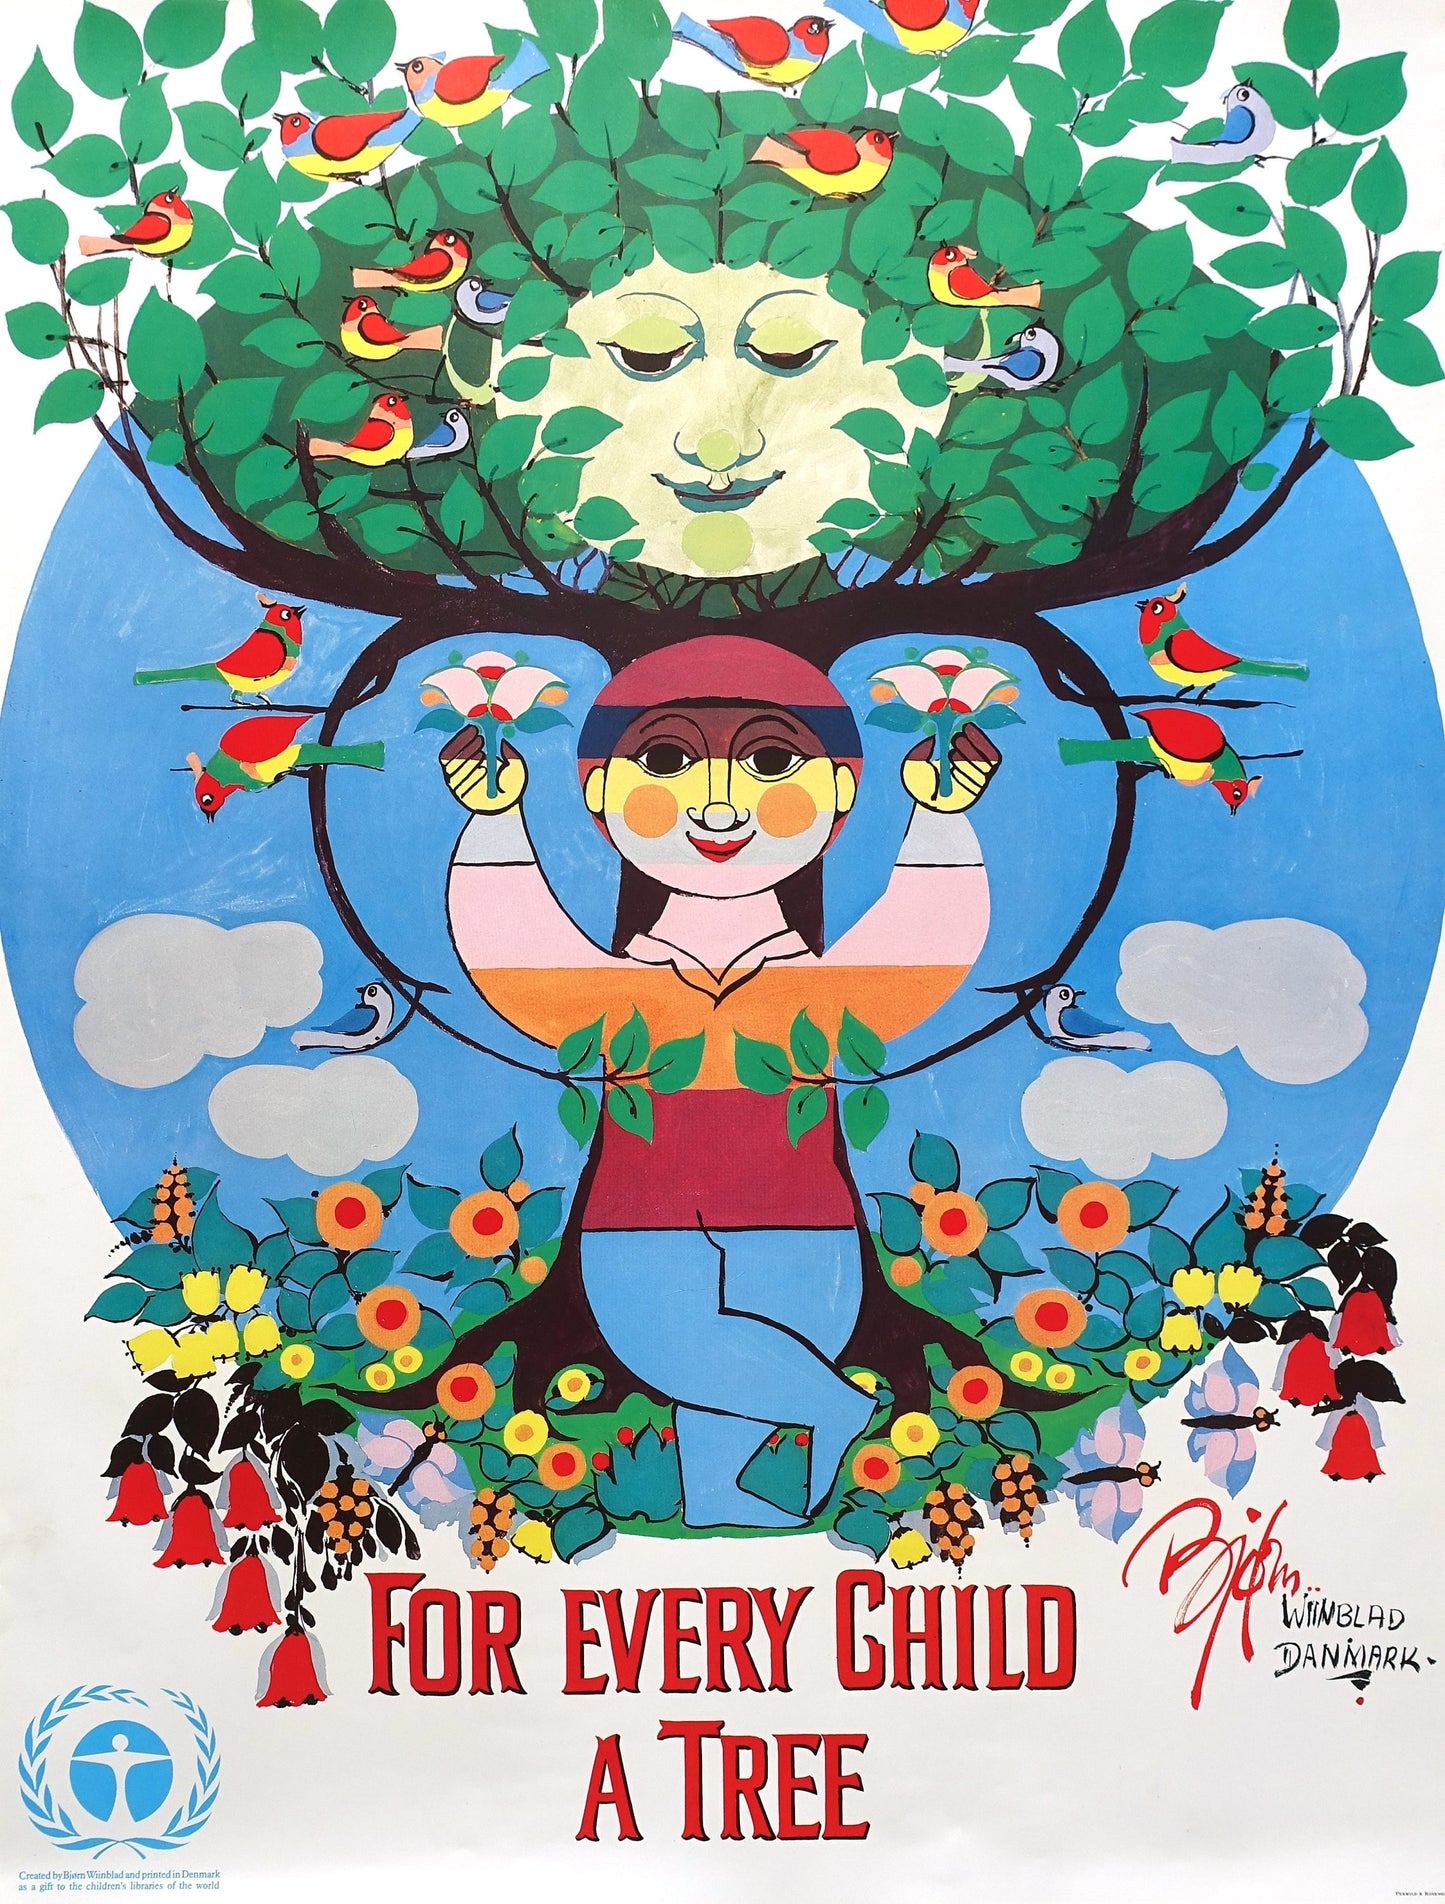 1986 Wiinblad For Every Child a Tree - Original Vintage Poster